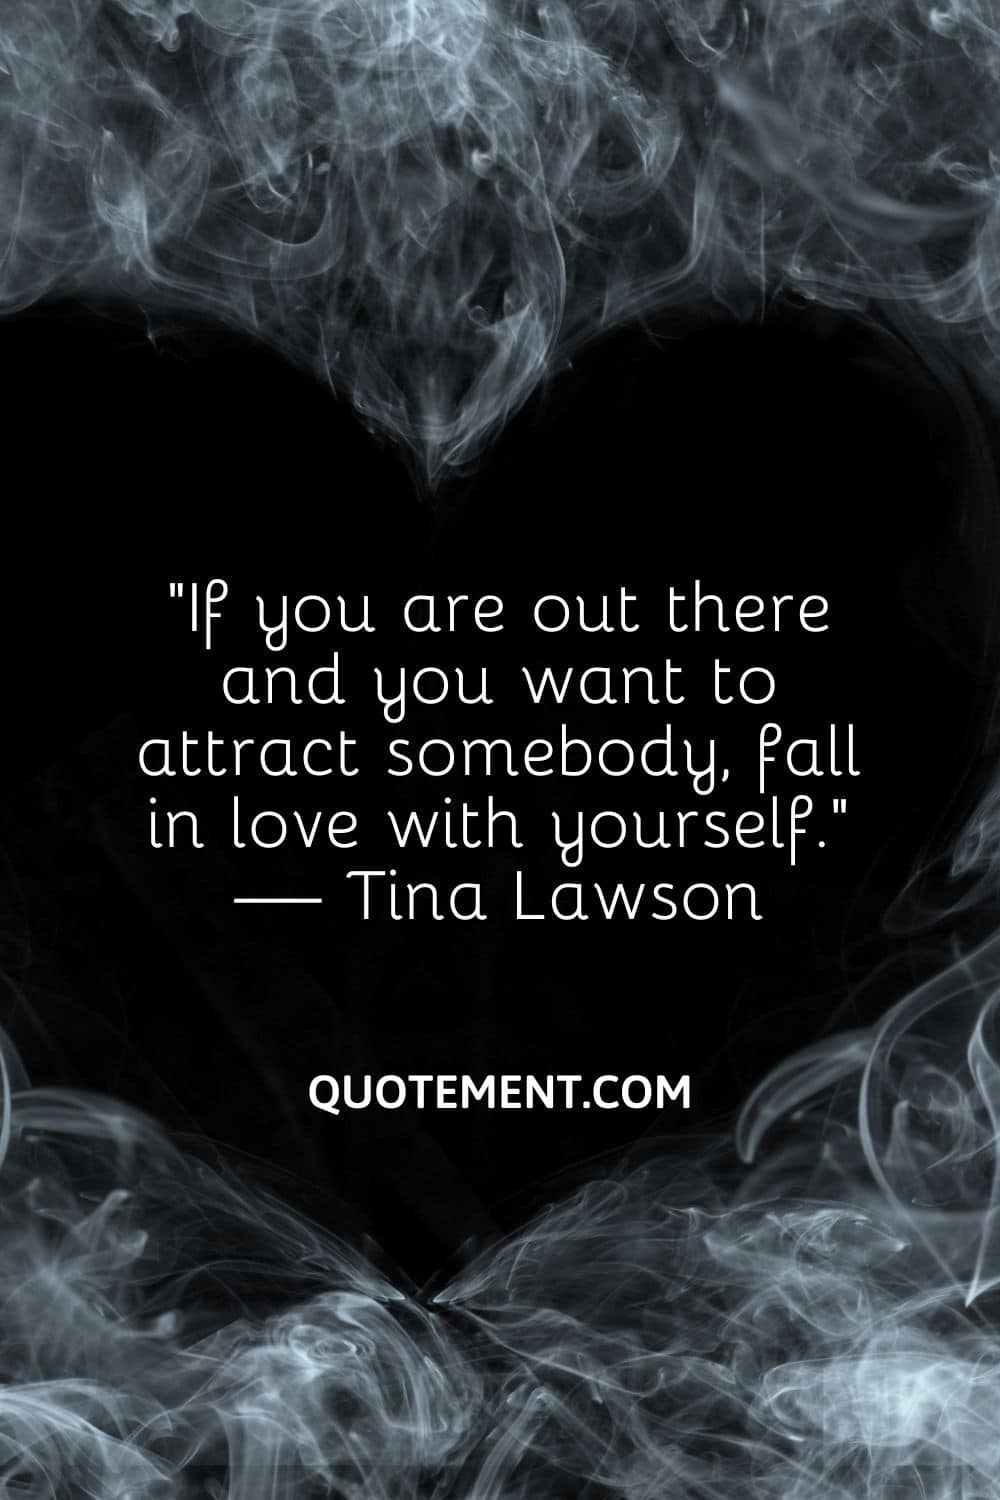 If you are out there and you want to attract somebody, fall in love with yourself